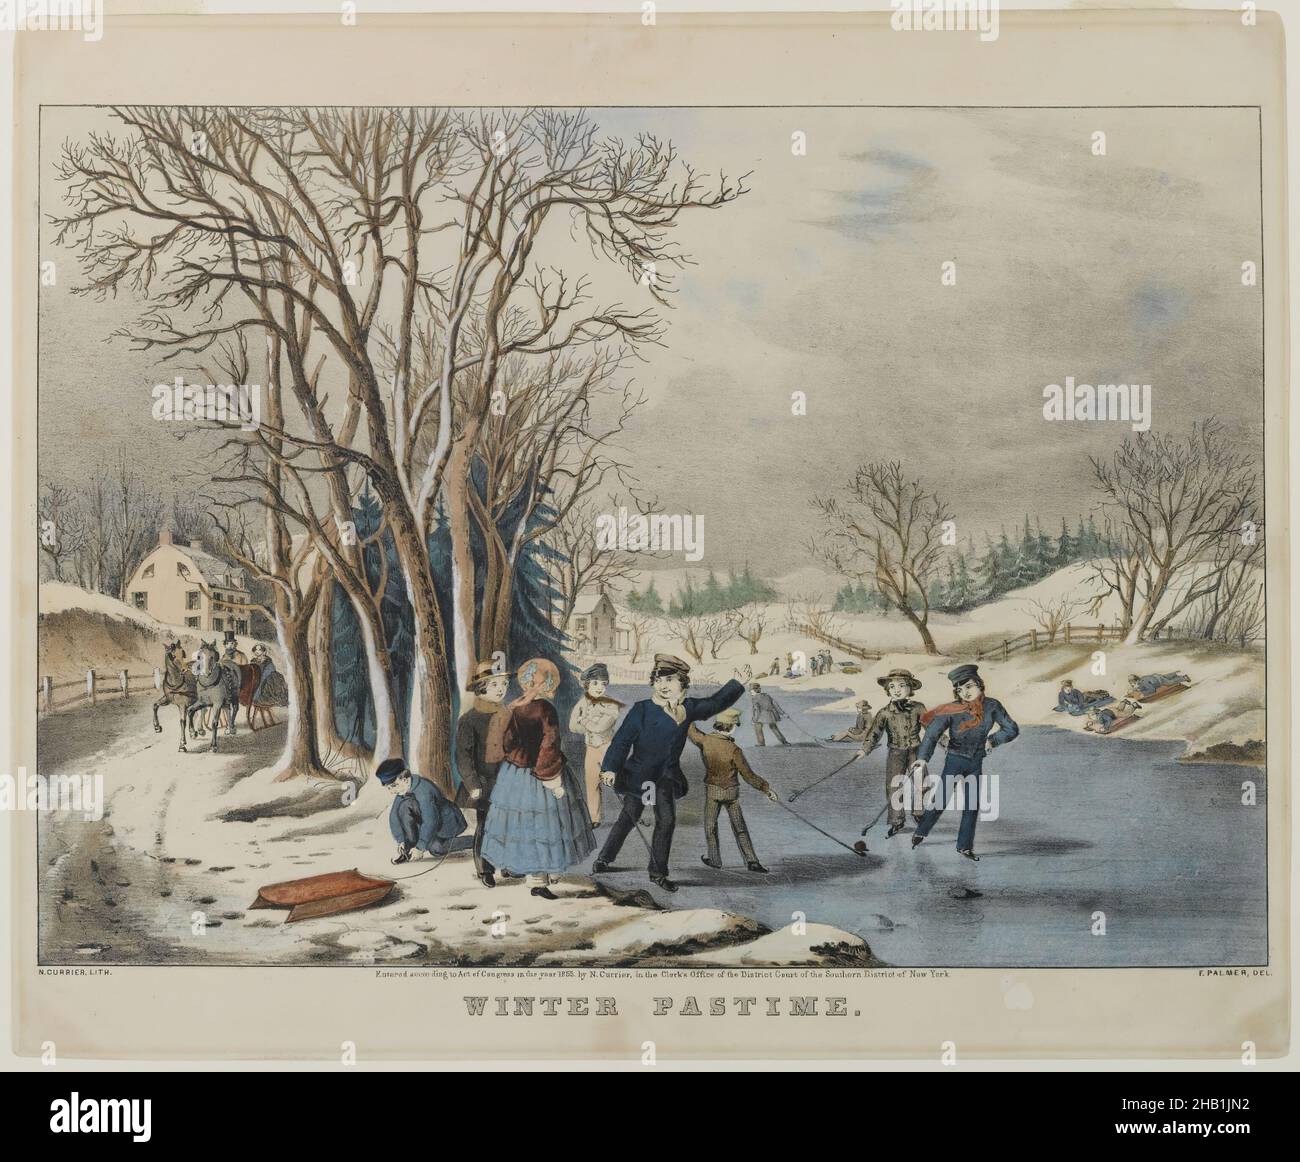 Winter Pastime, Hand-colored lithograph on wove paper, 1855, 10 3/8 x 14 3/4in., 26.4 x 37.5cm, American, Americana, Carriage, Folksy, Fun, Games, Hockey, Horse, Landscape, Leisure, Nostalgia, Rural, Sledding, Snow, Winter Stock Photo